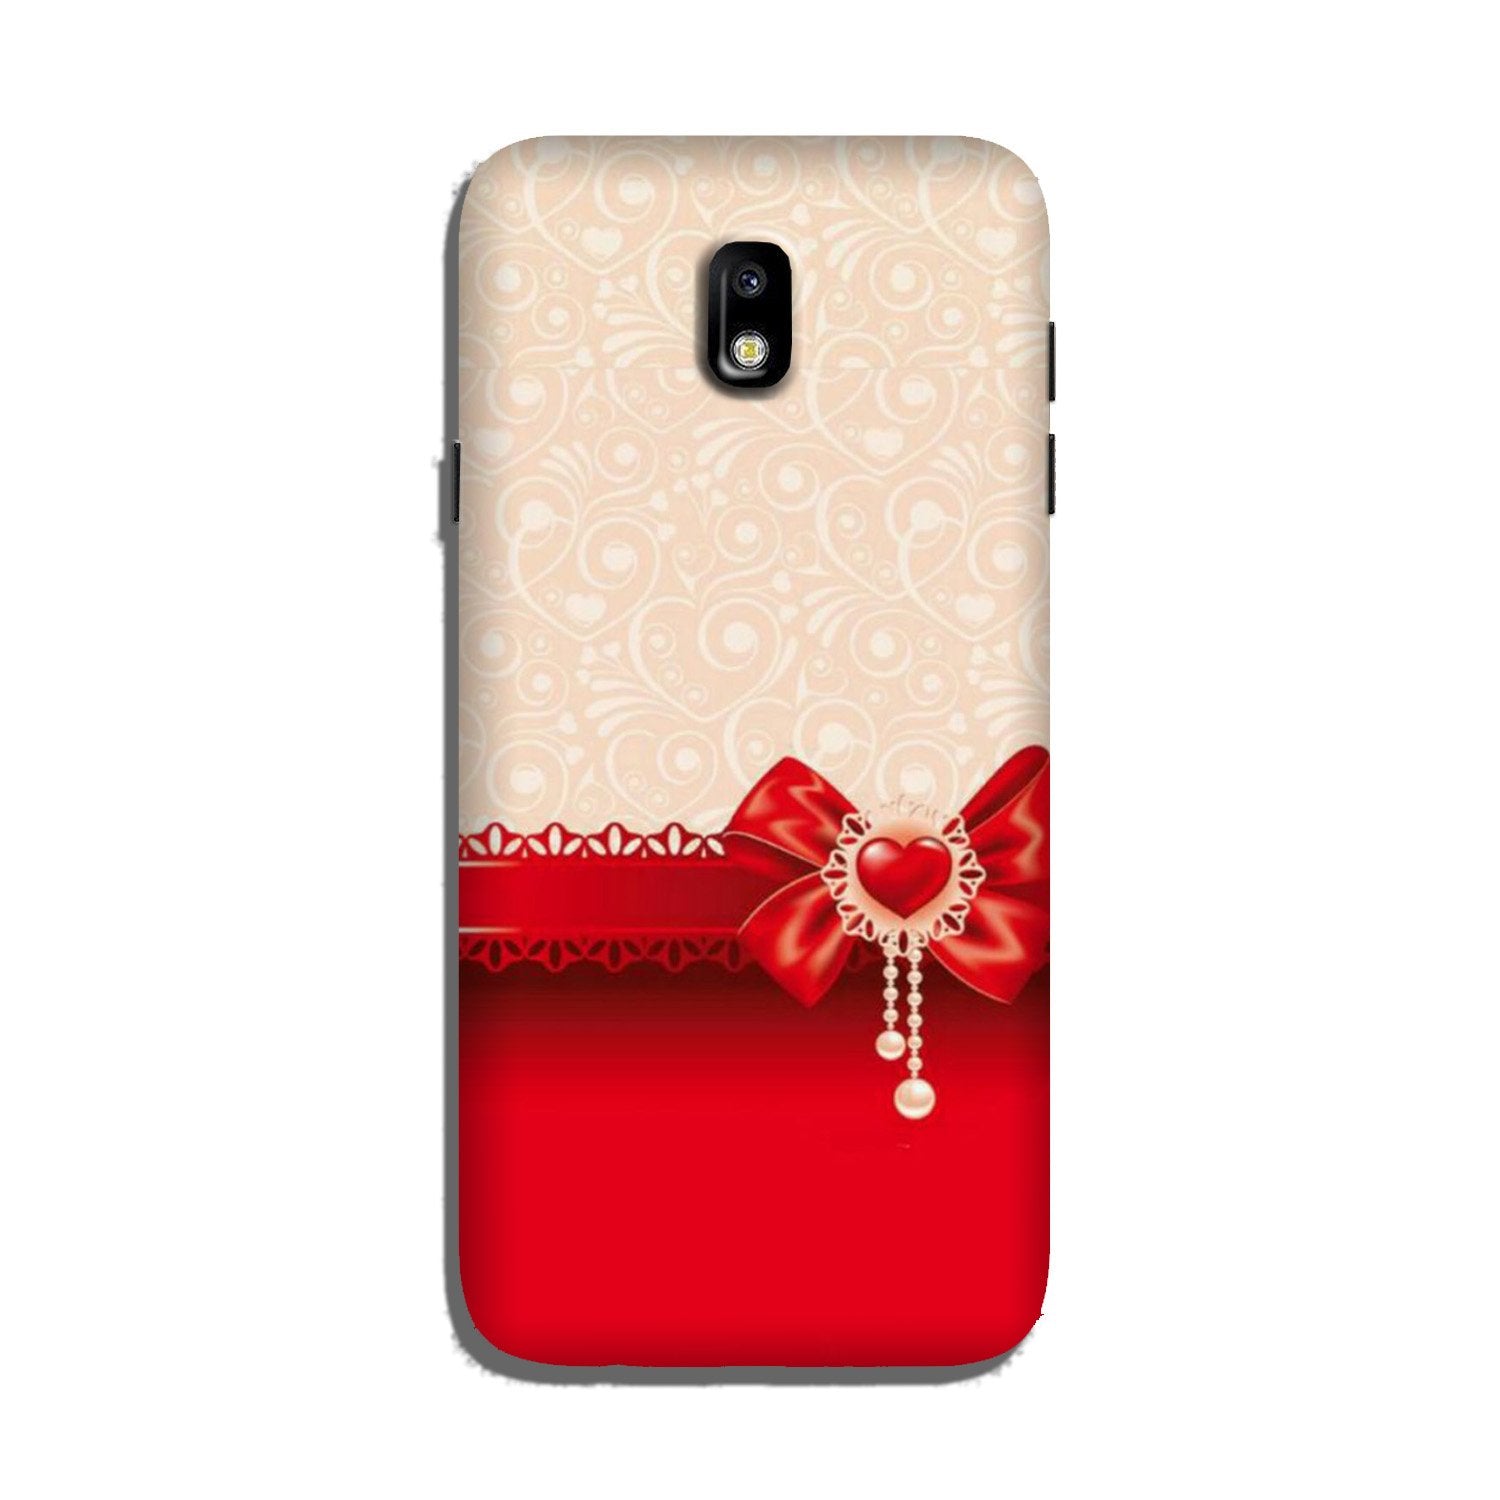 Gift Wrap3 Case for Galaxy J3 Pro